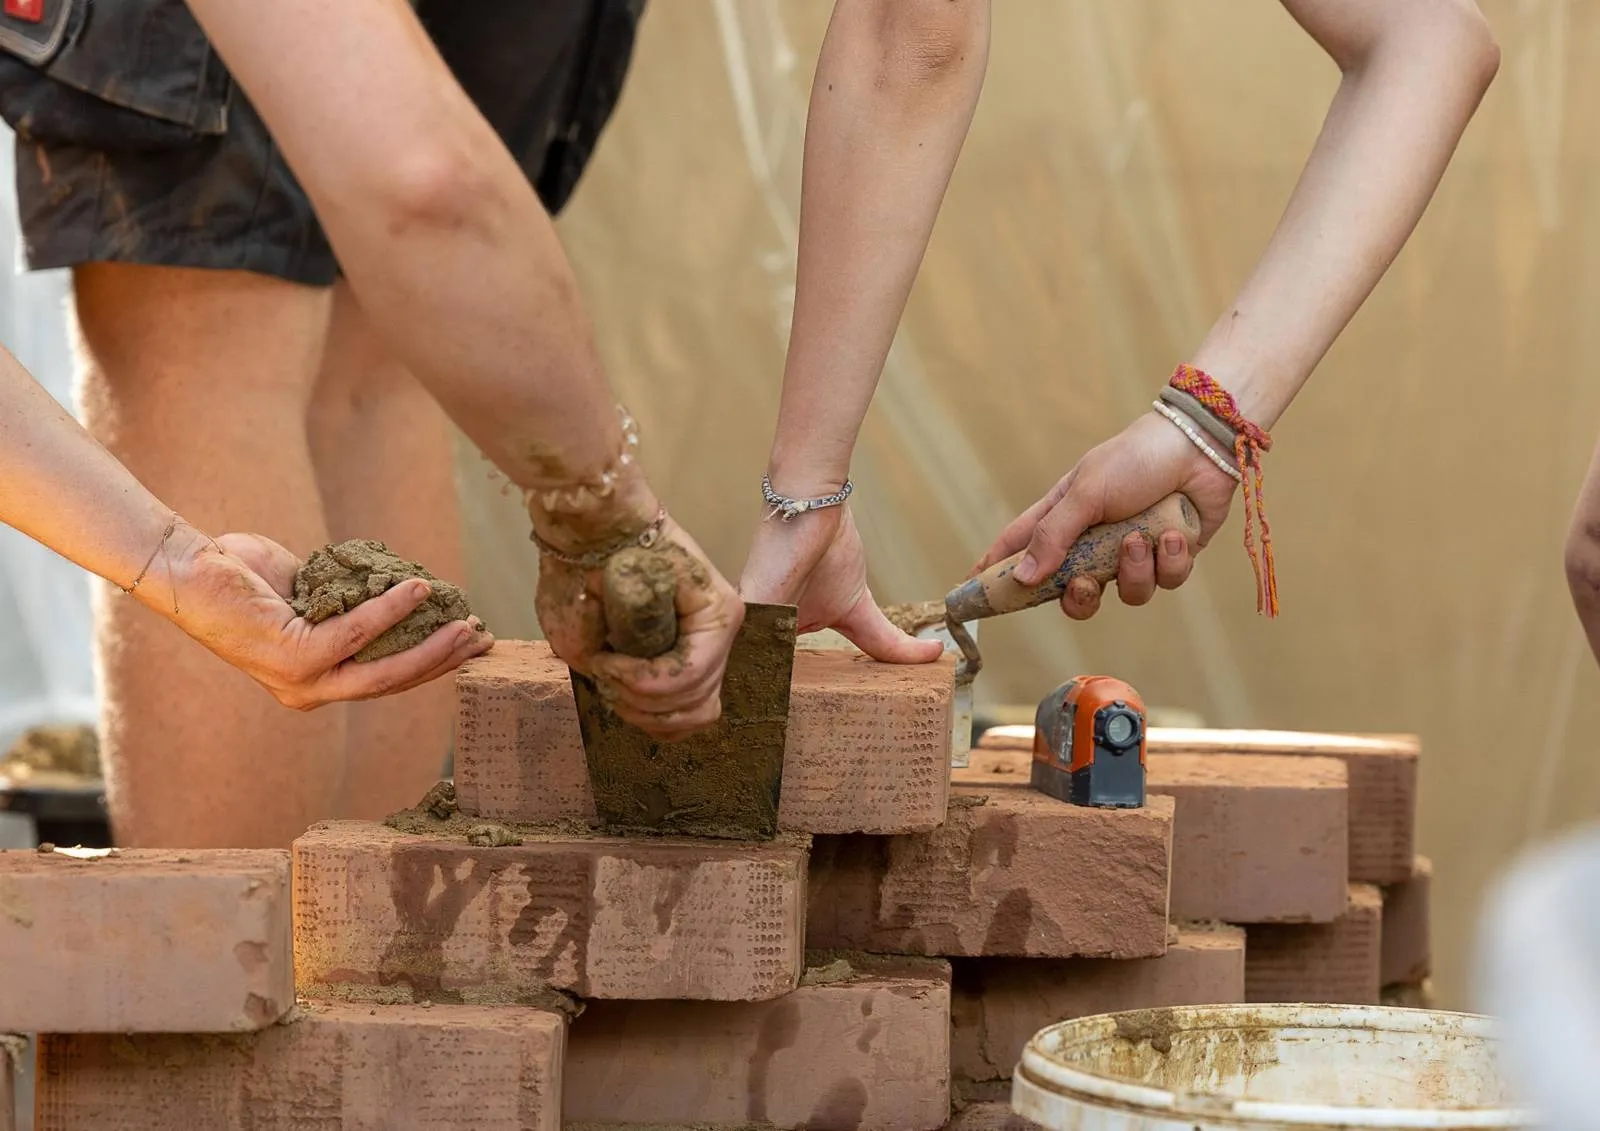 A stack of clay bricks being built. Some hands can be seen working.